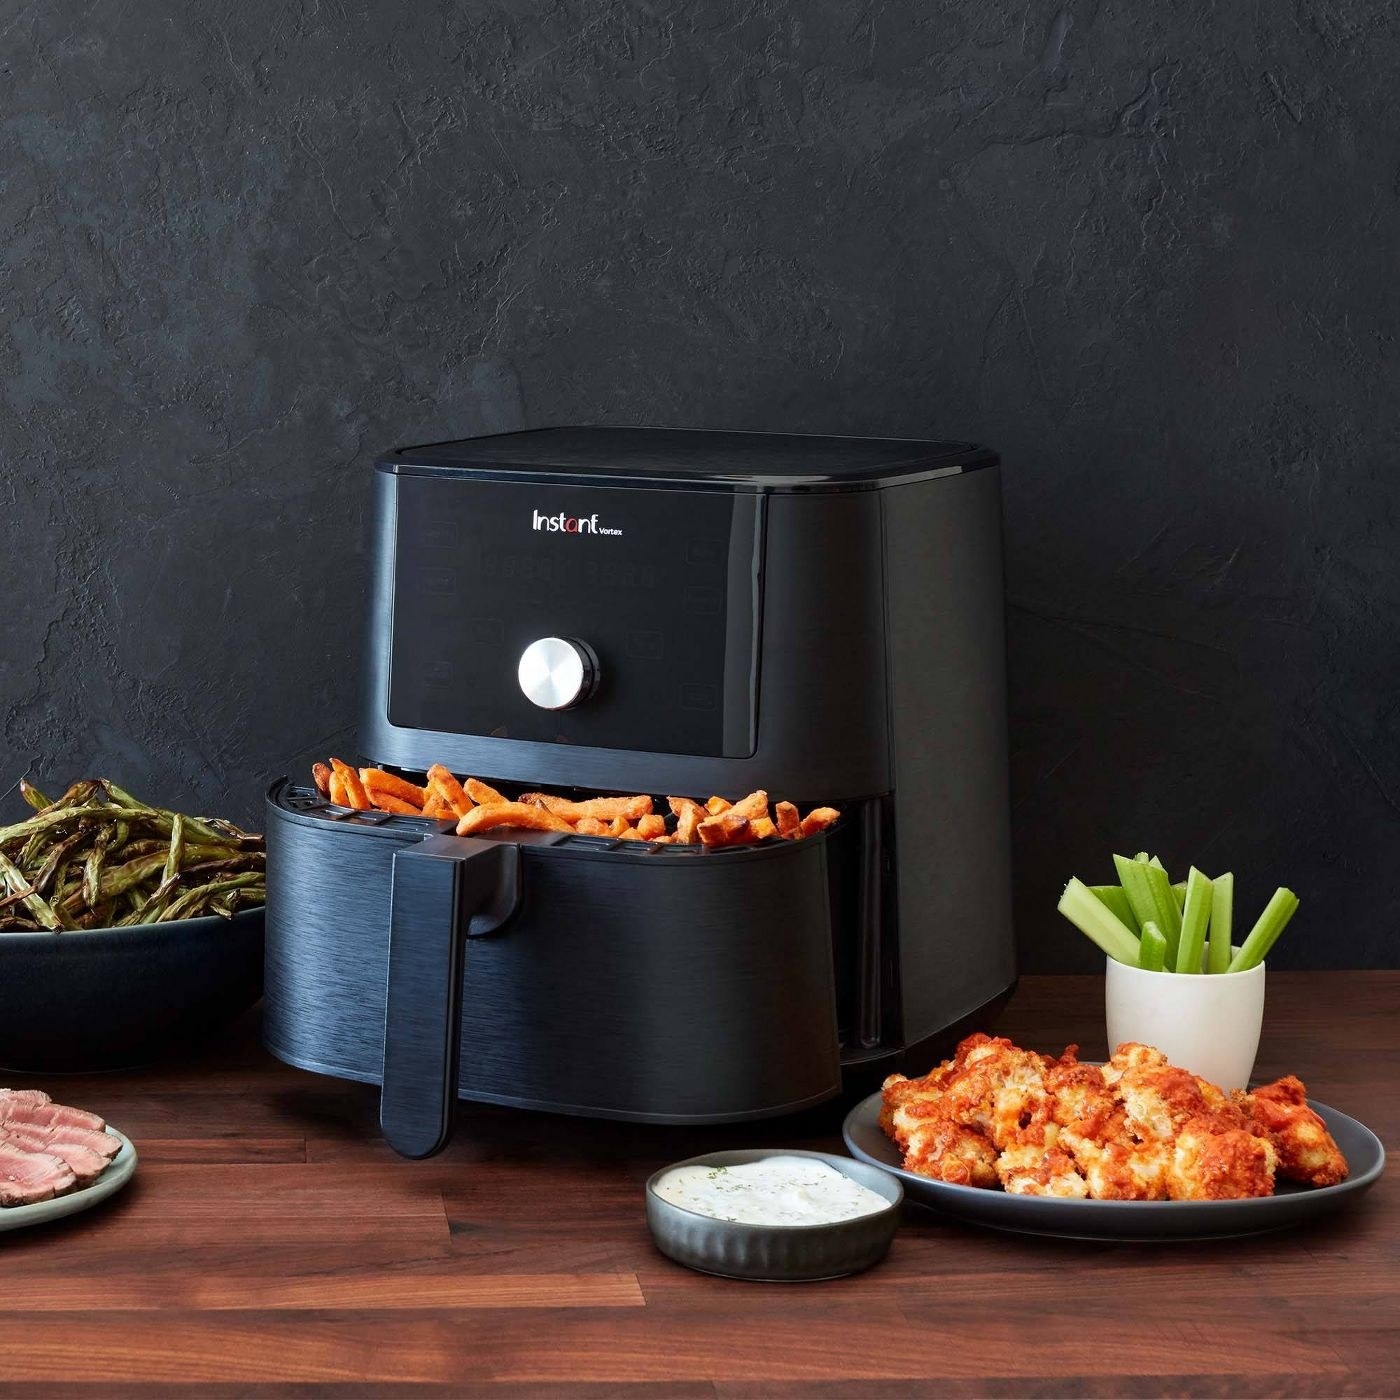 the air fryer with fries and wings and veggies